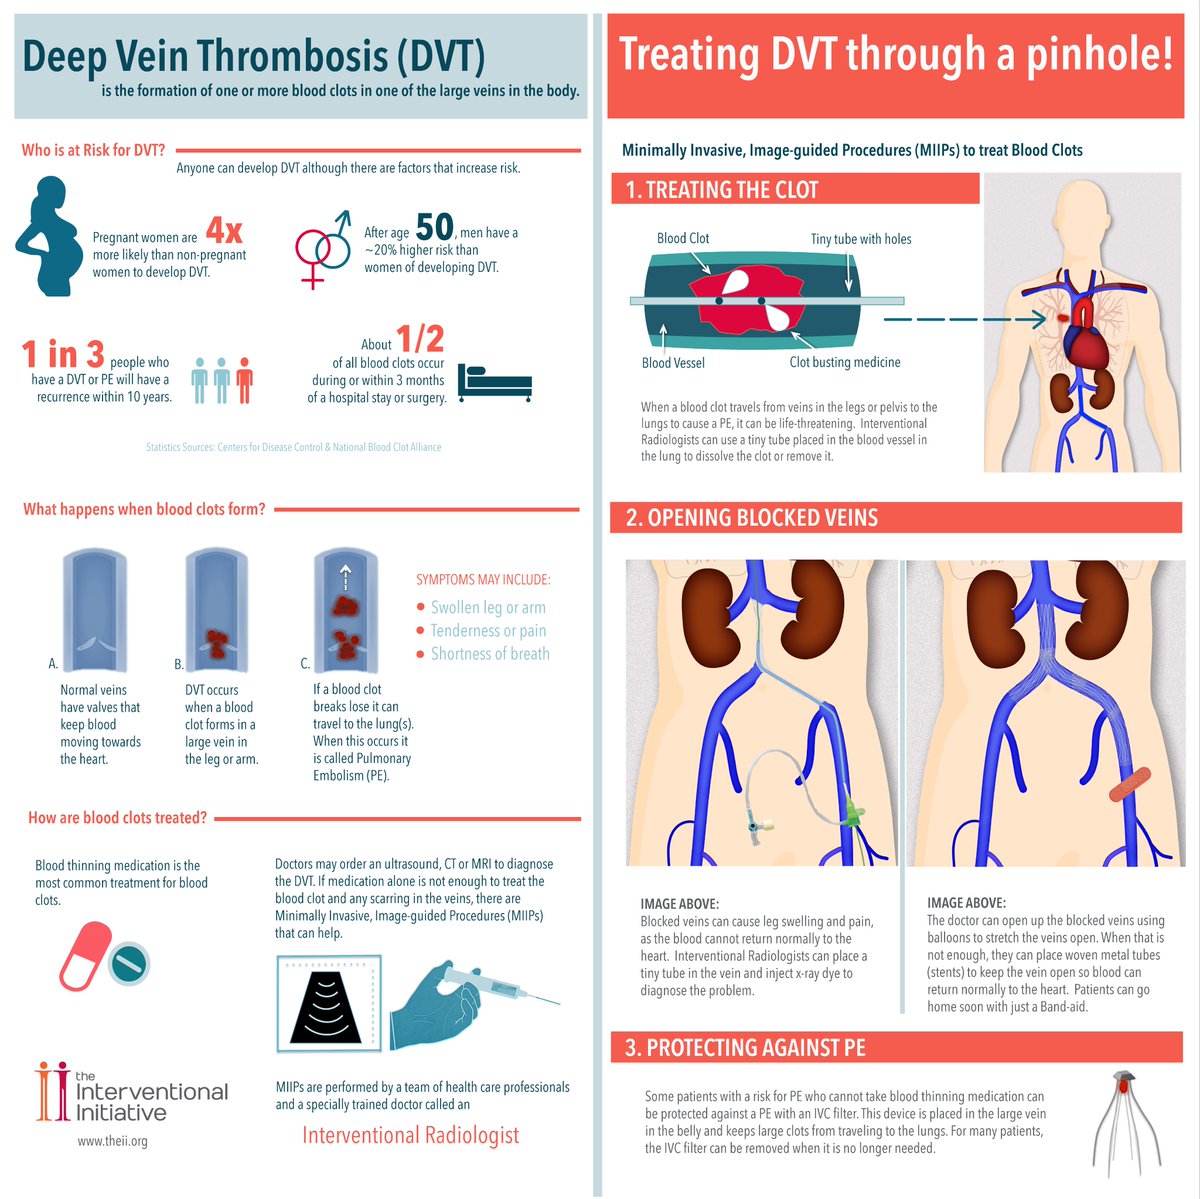 Check out the latest #Infographic on Minimally Invasive, Image-guided Procedures #MIIPs to treat #DVT #withoutascalpel 

#DVTAwarenessMonth 
#IRAD
#FridayFeeling 
#patientchat